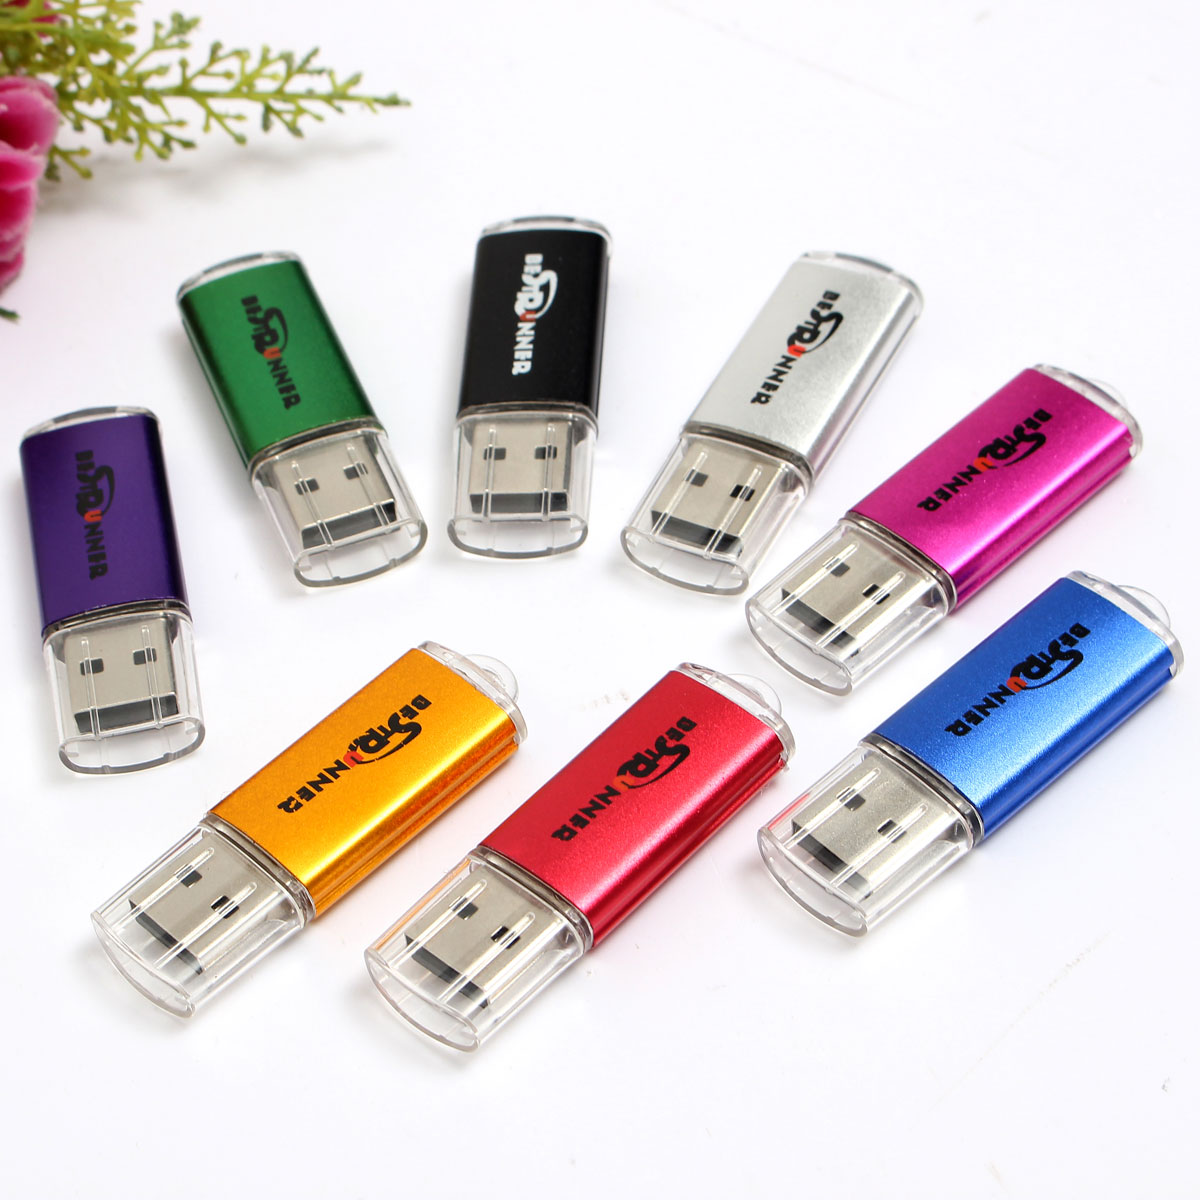 Find BESTRUNNER USB Flash Drive 2 0 Flash Memory Stick Pen Drive Storage Thumb U Disk 64MB for Sale on Gipsybee.com with cryptocurrencies